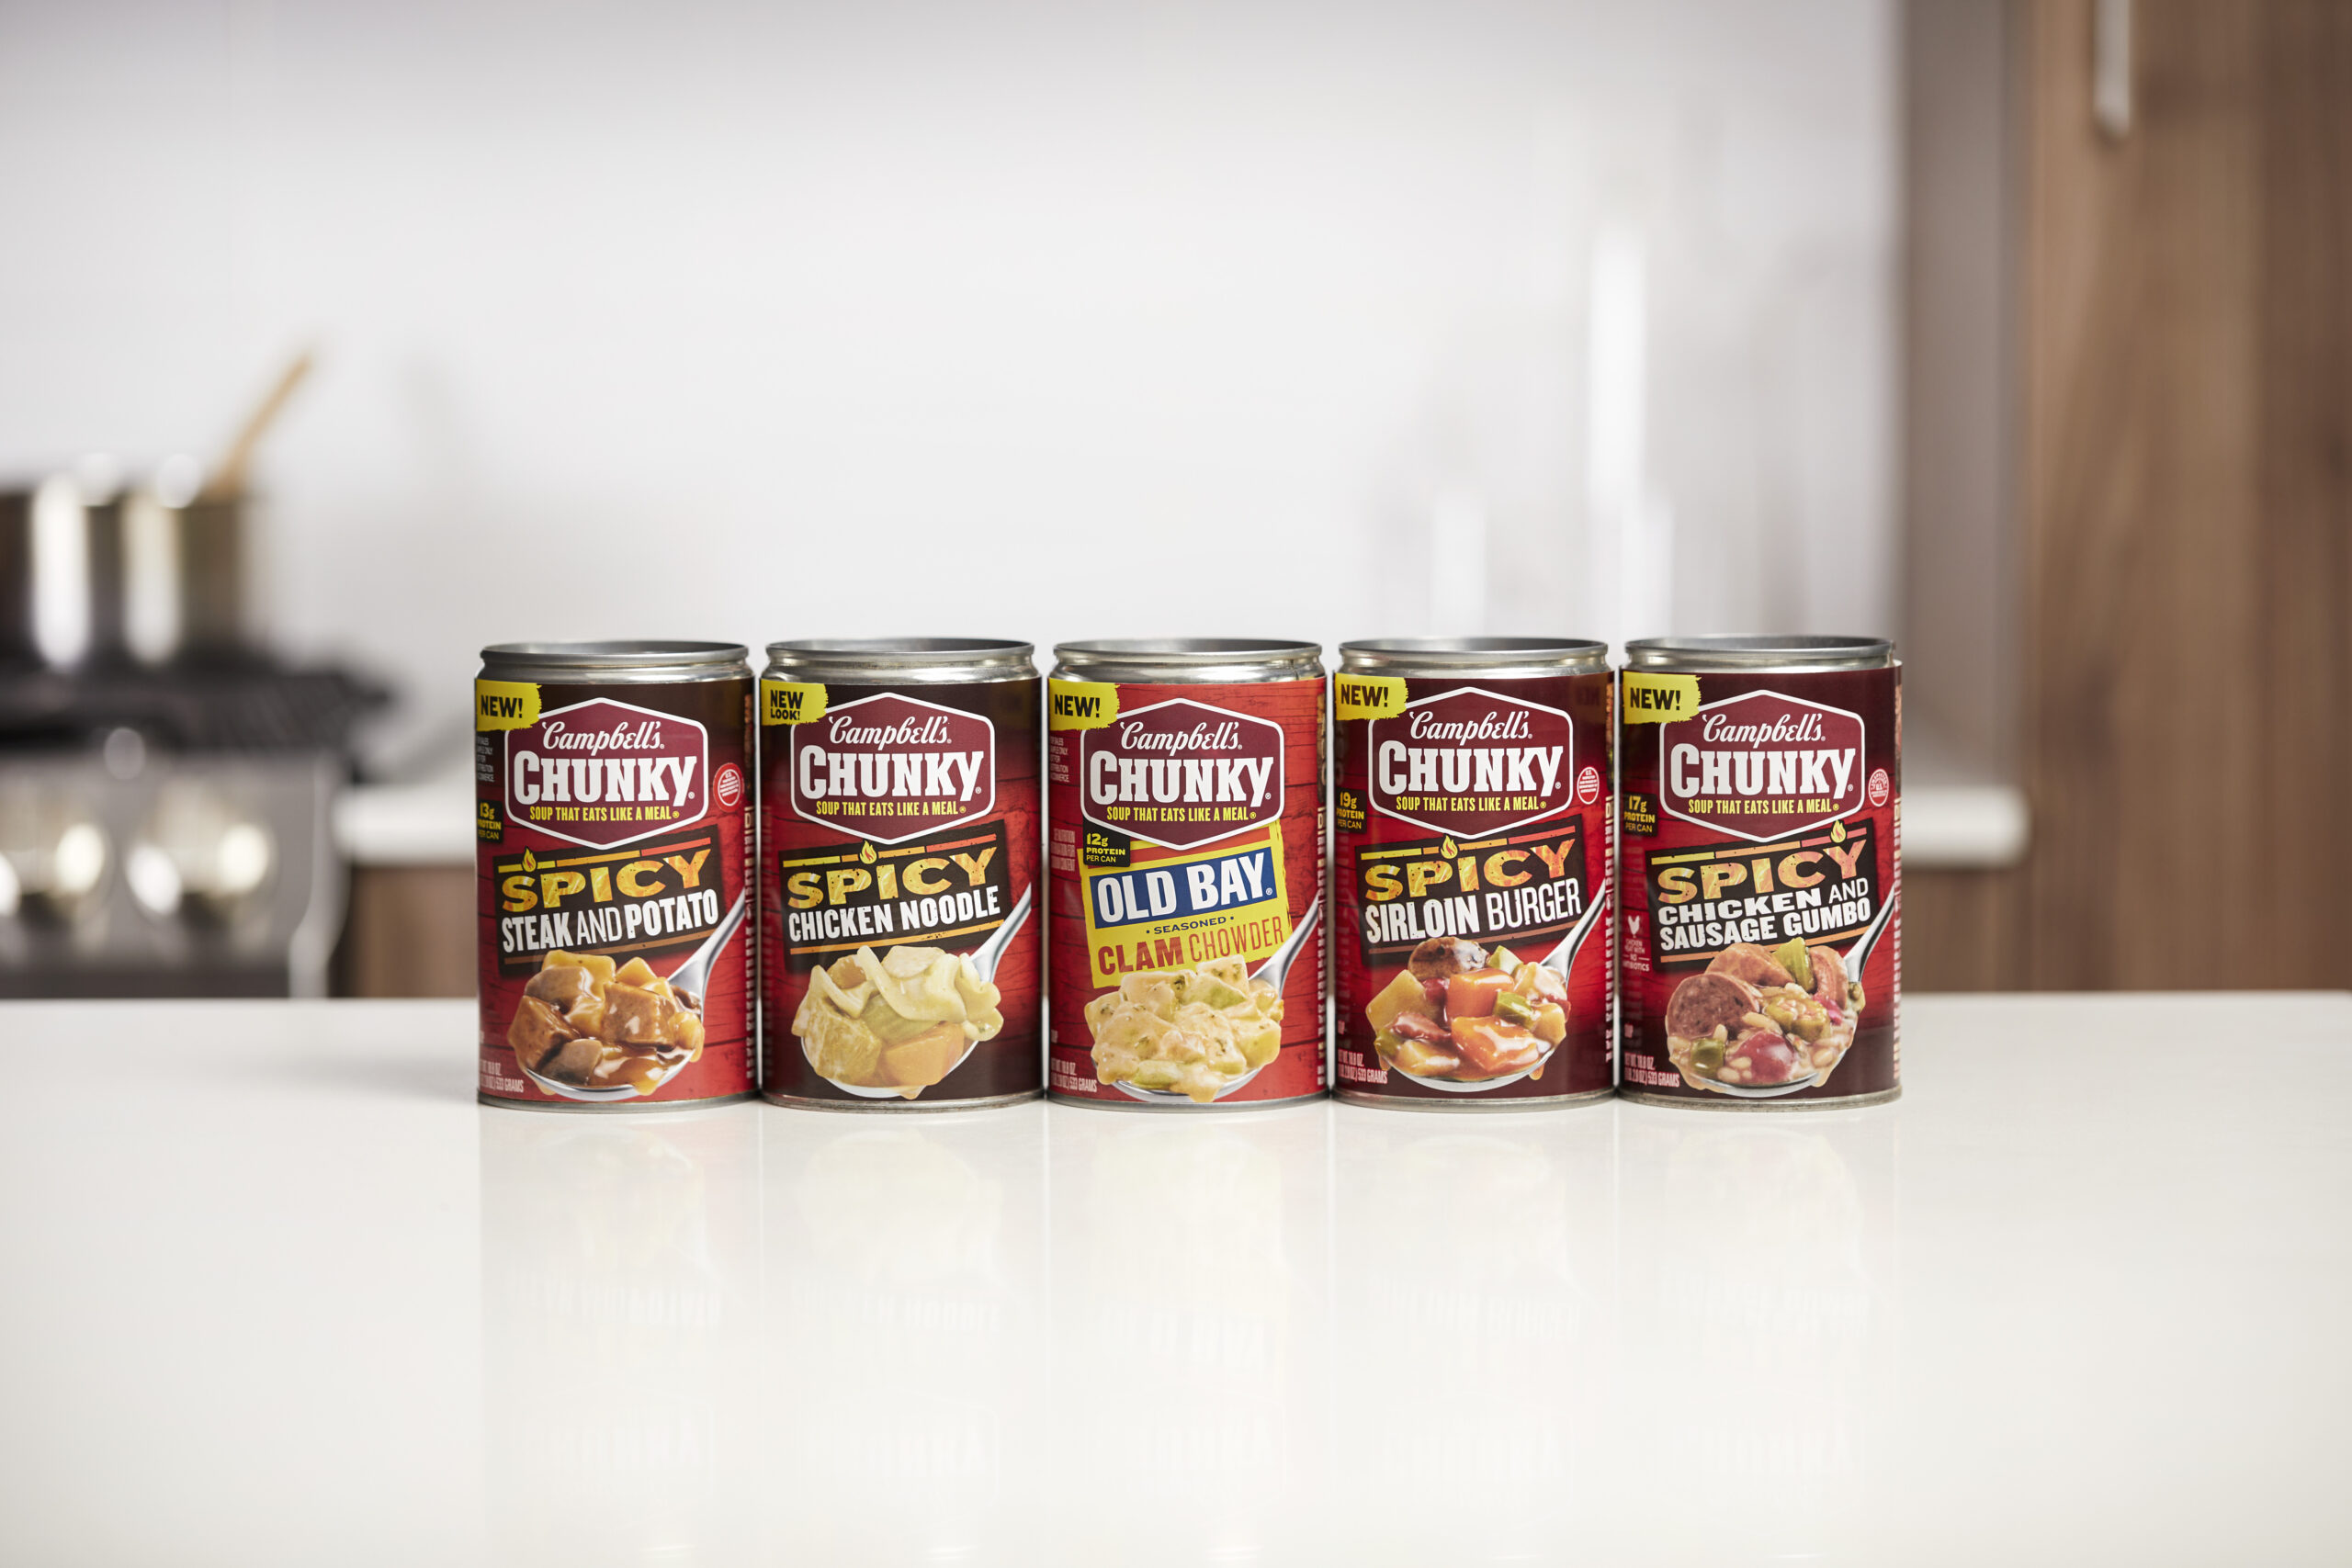 Lined up cans of Chunky soup, including Spicy Steak and Potato, Spicy Chicken Noodle, OLD BAY Seasoned Clam Chowder, Spicy Sirloin Burger, and Spicy Chicken and Sausage Gumbo